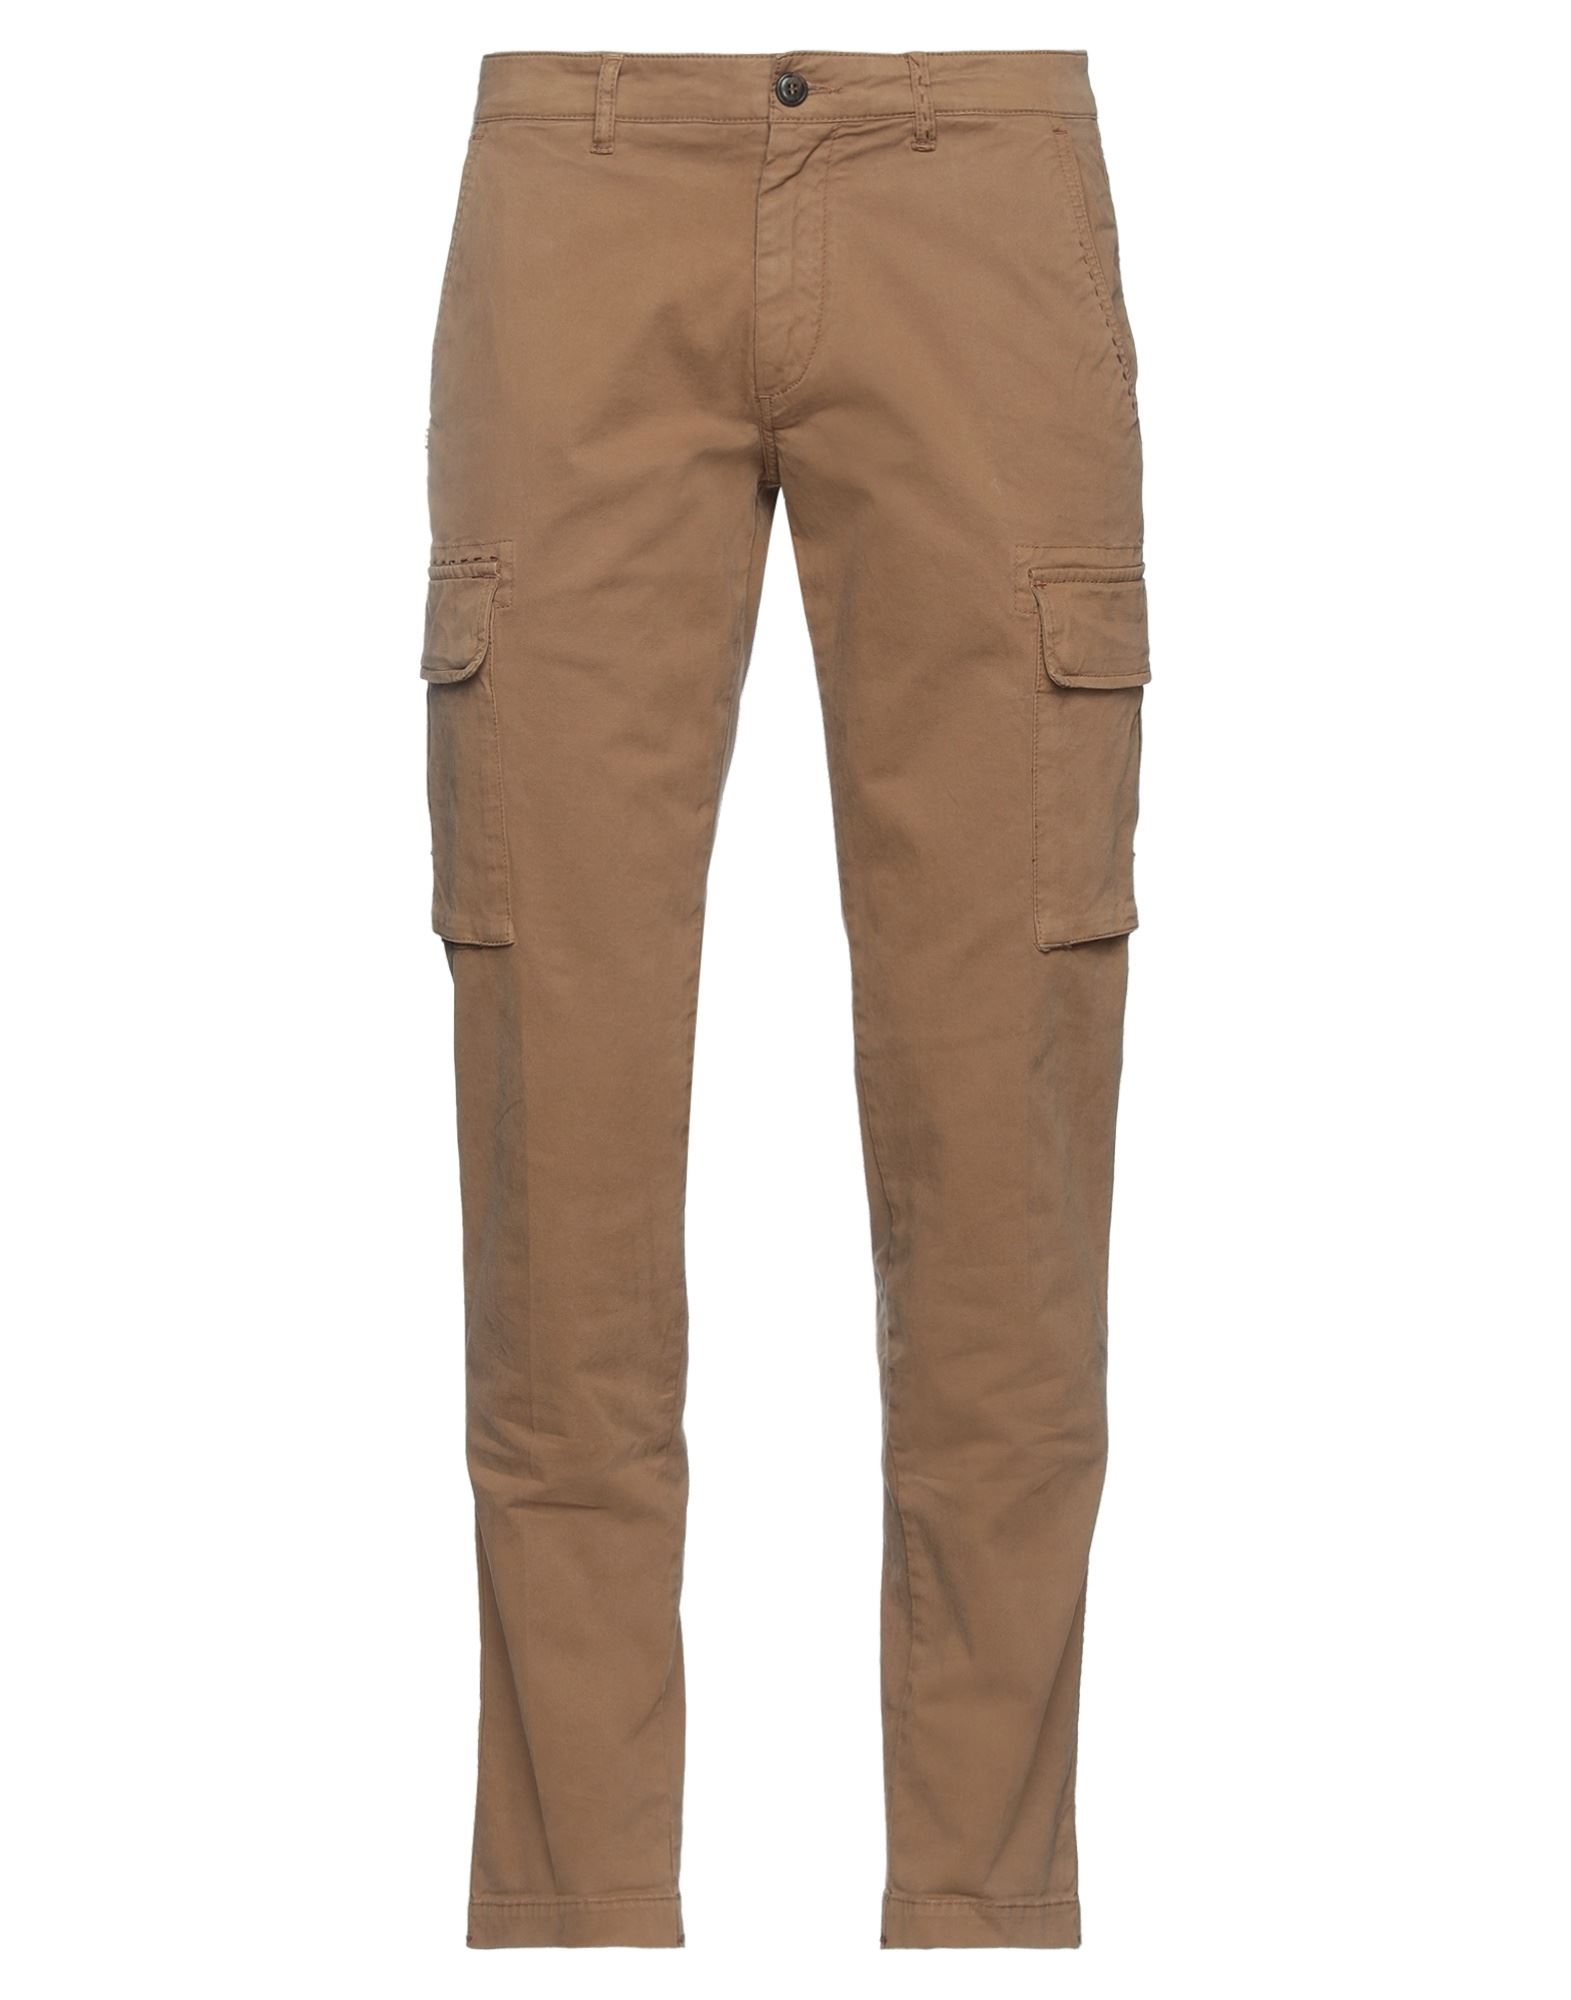 40weft Pants In Camel